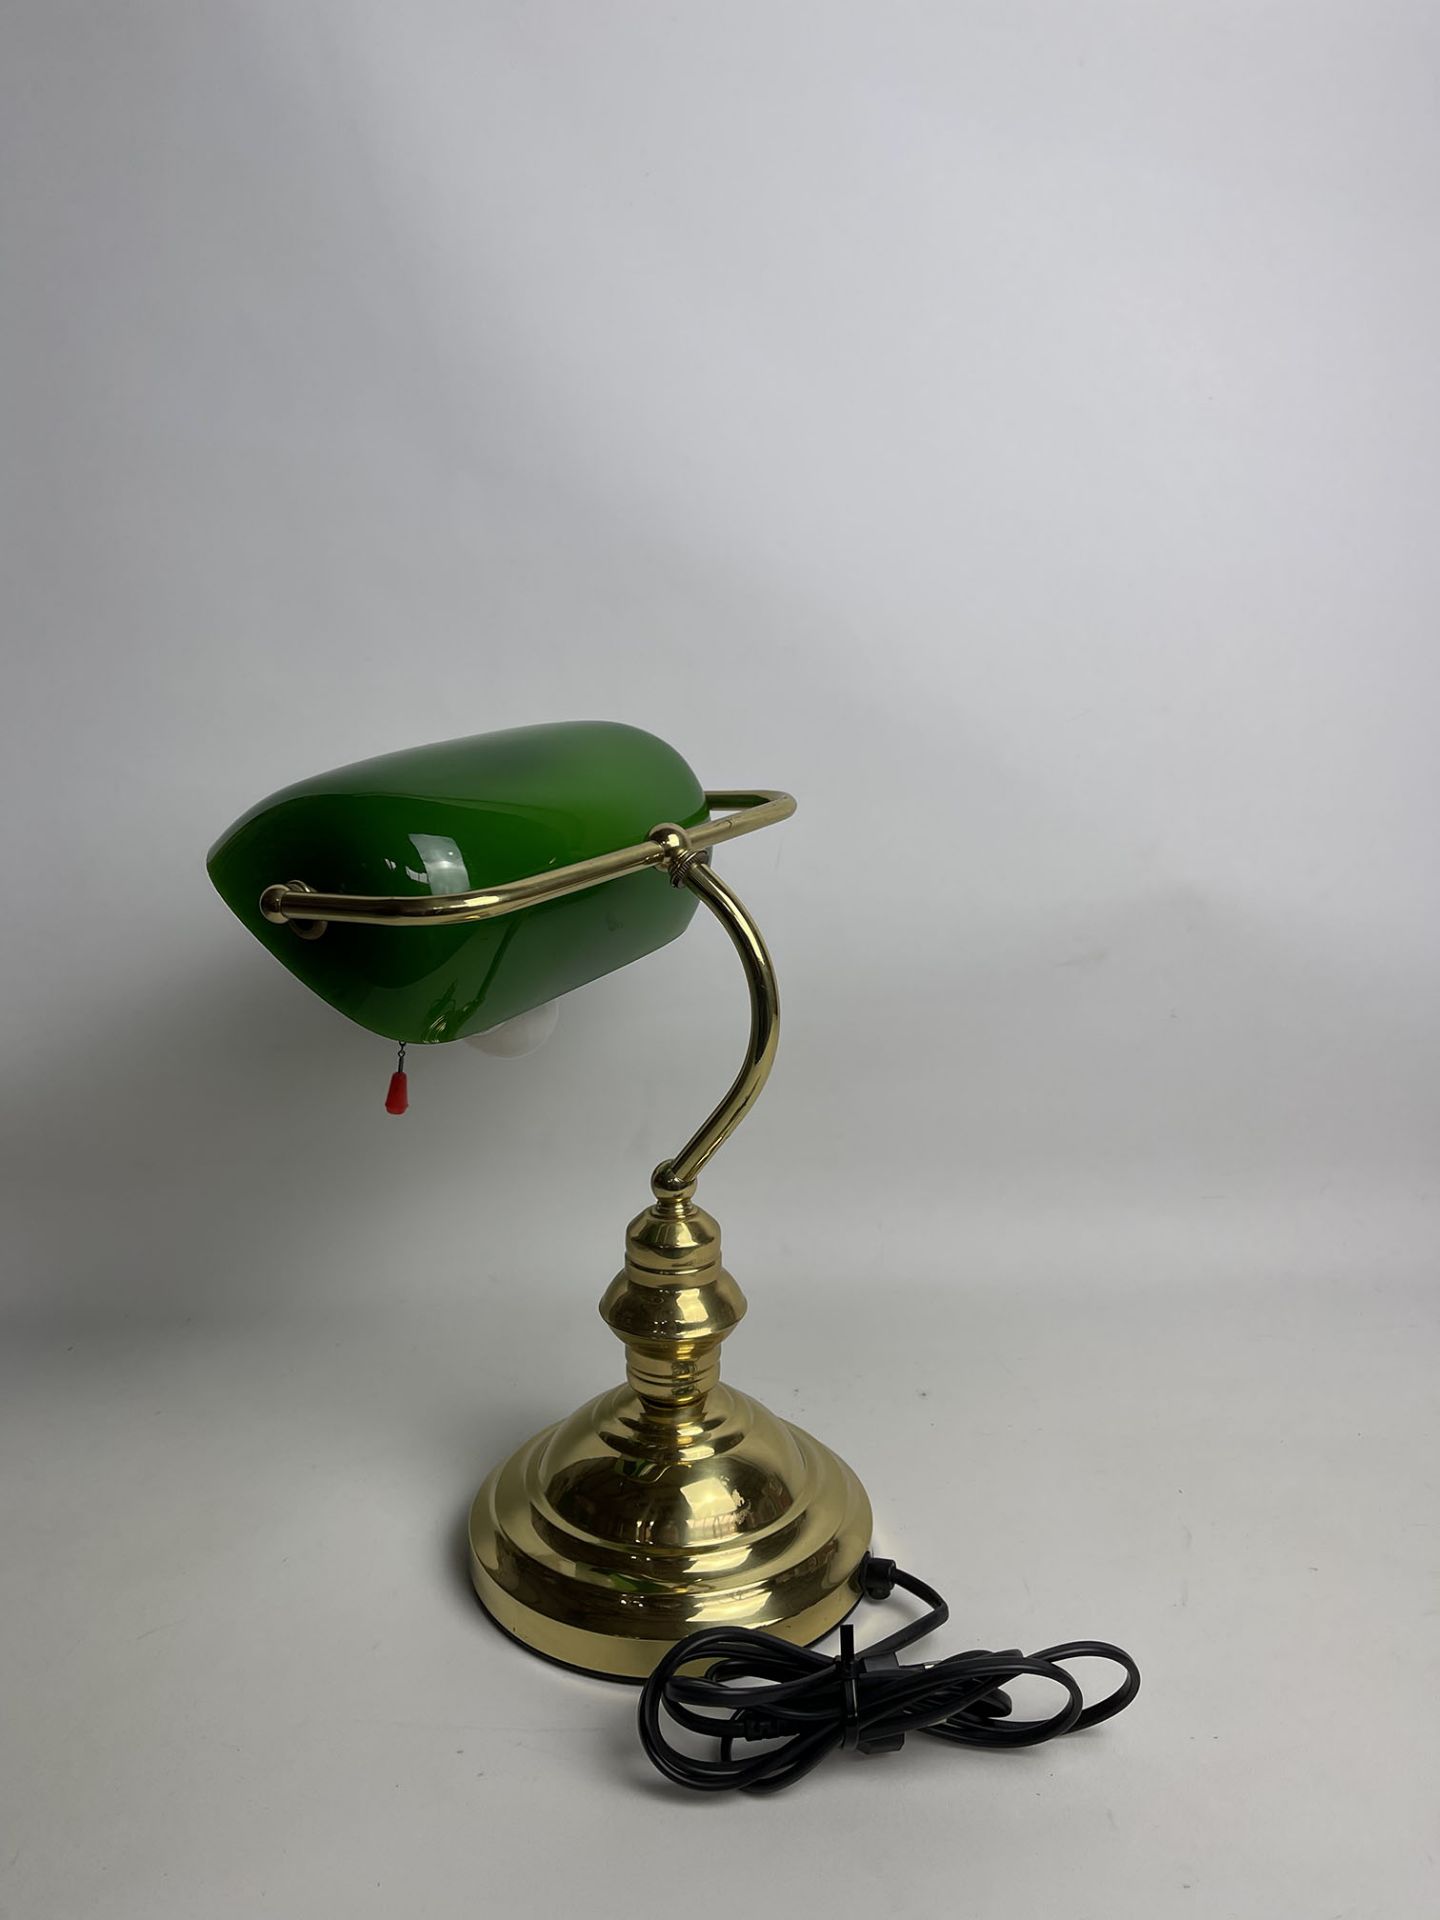 Vintage American Desk Lamp with Green Lamp Shade - Image 6 of 9